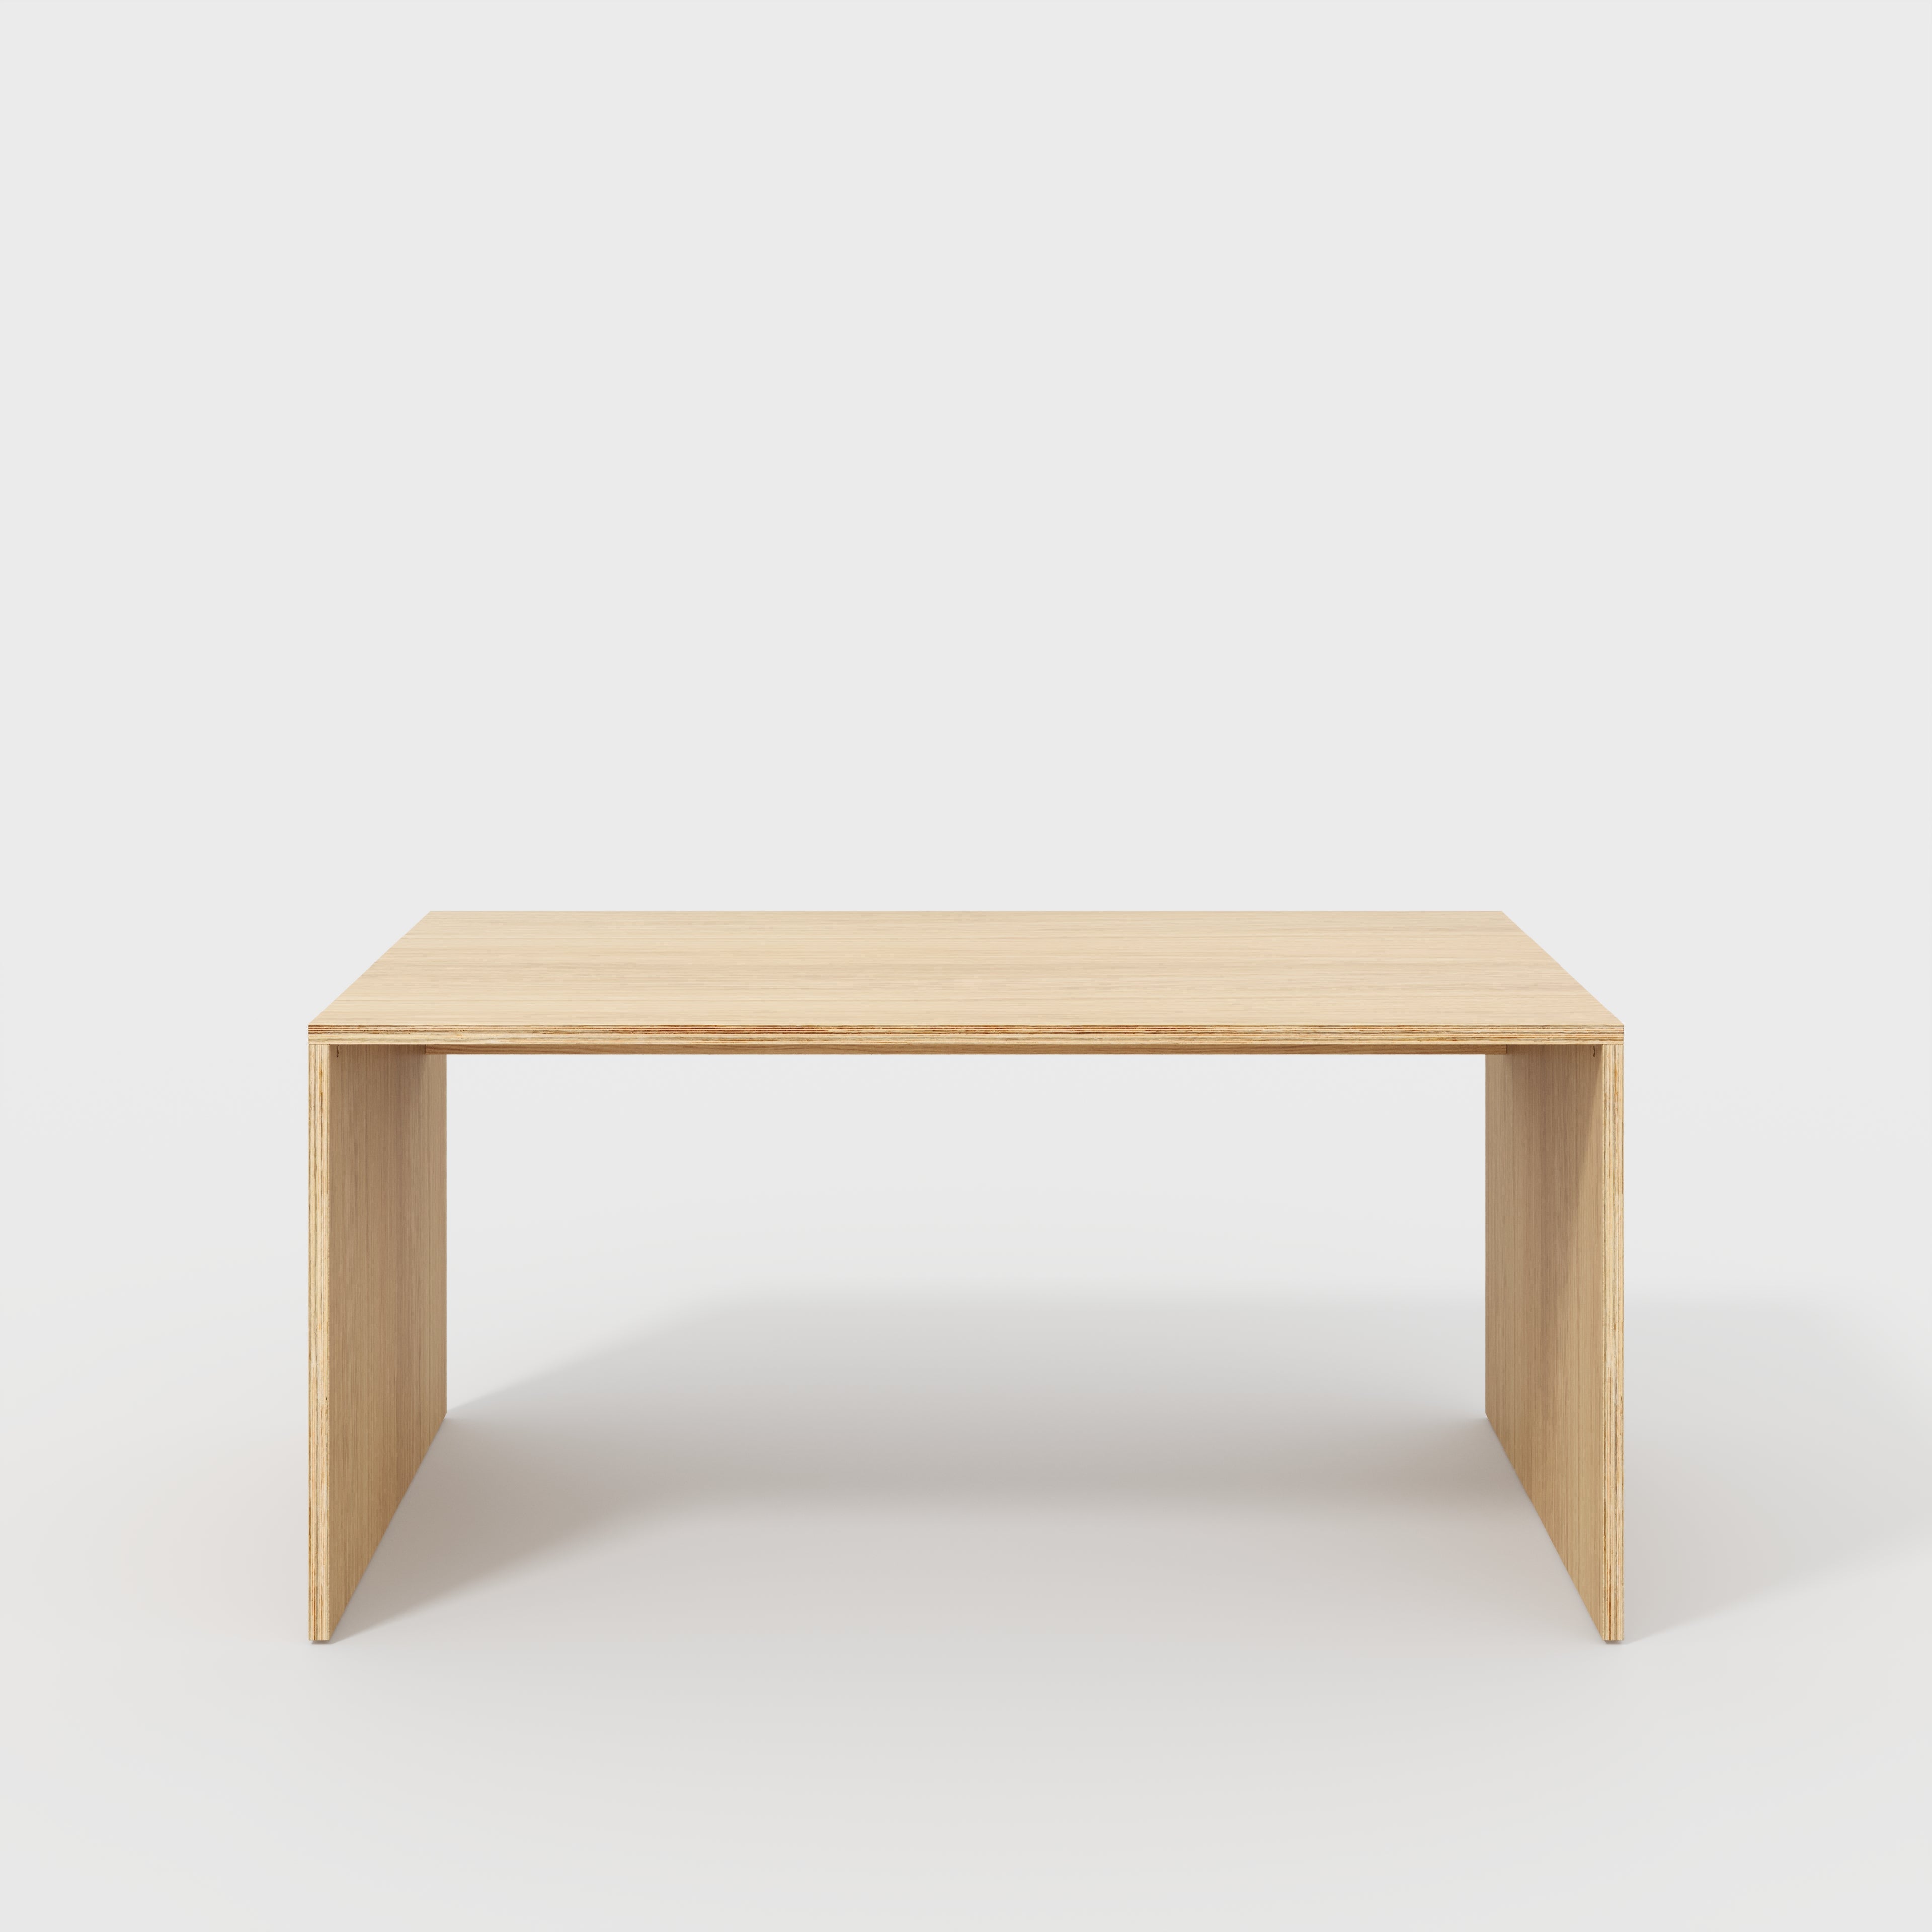 Desk with Solid Sides - Plywood Oak - 1600(w) x 800(d) x 750(h)